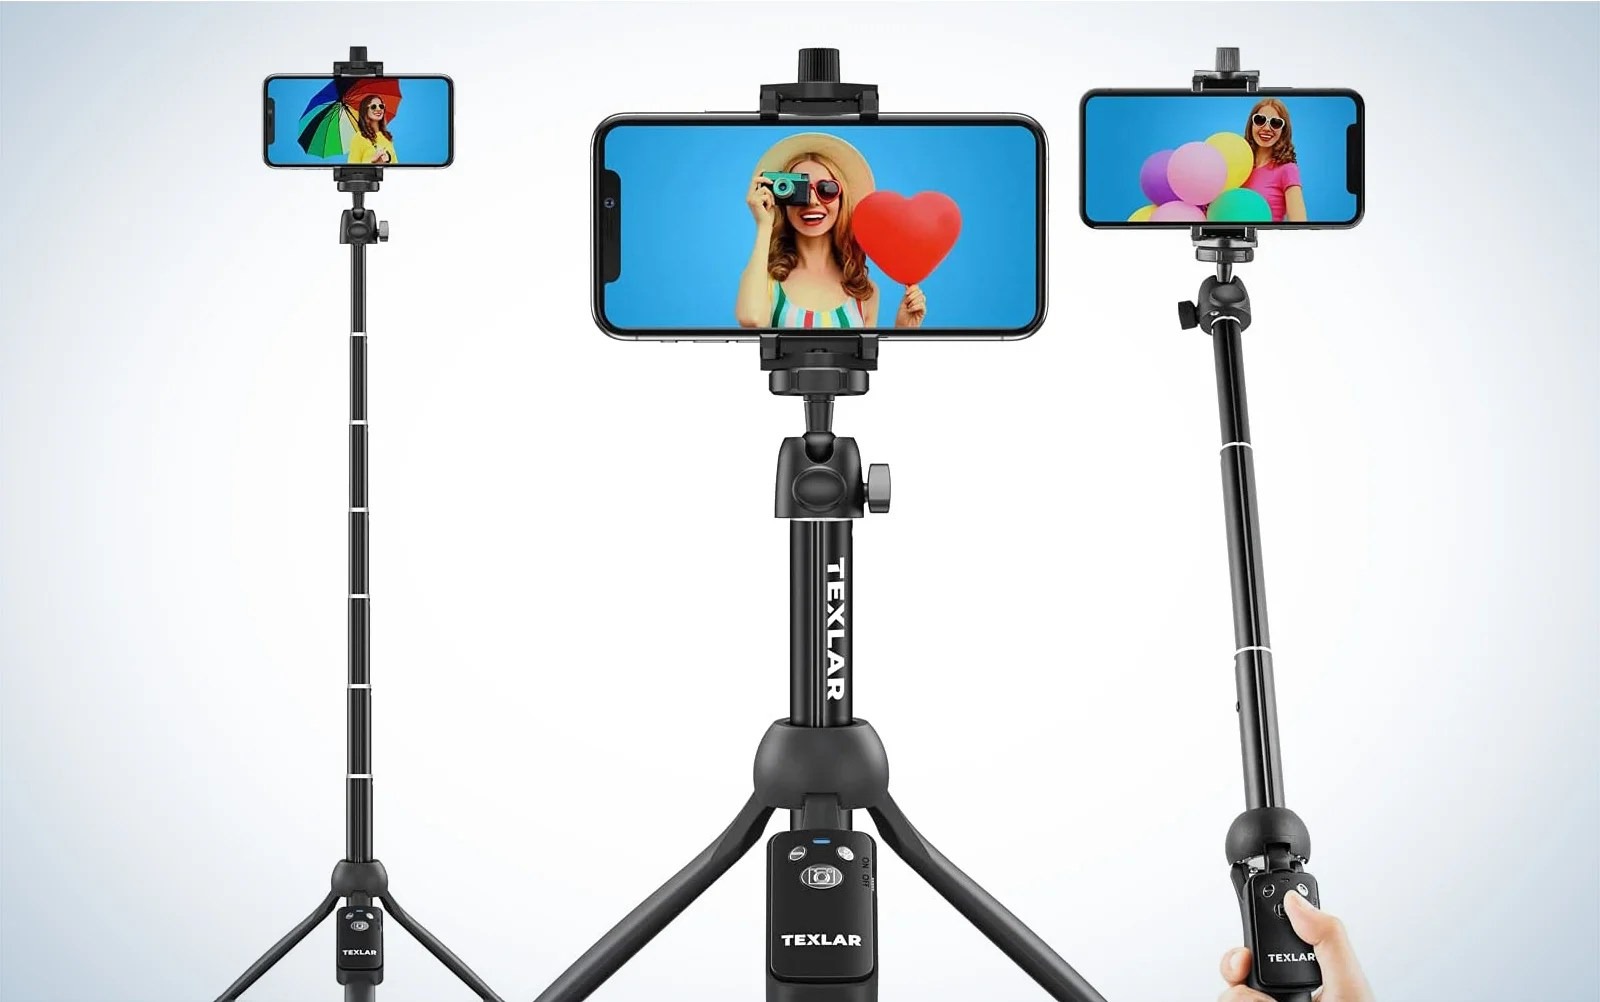 choosing-the-right-monopod-selfie-stick-with-bluetooth-remote-for-your-camera-and-phone